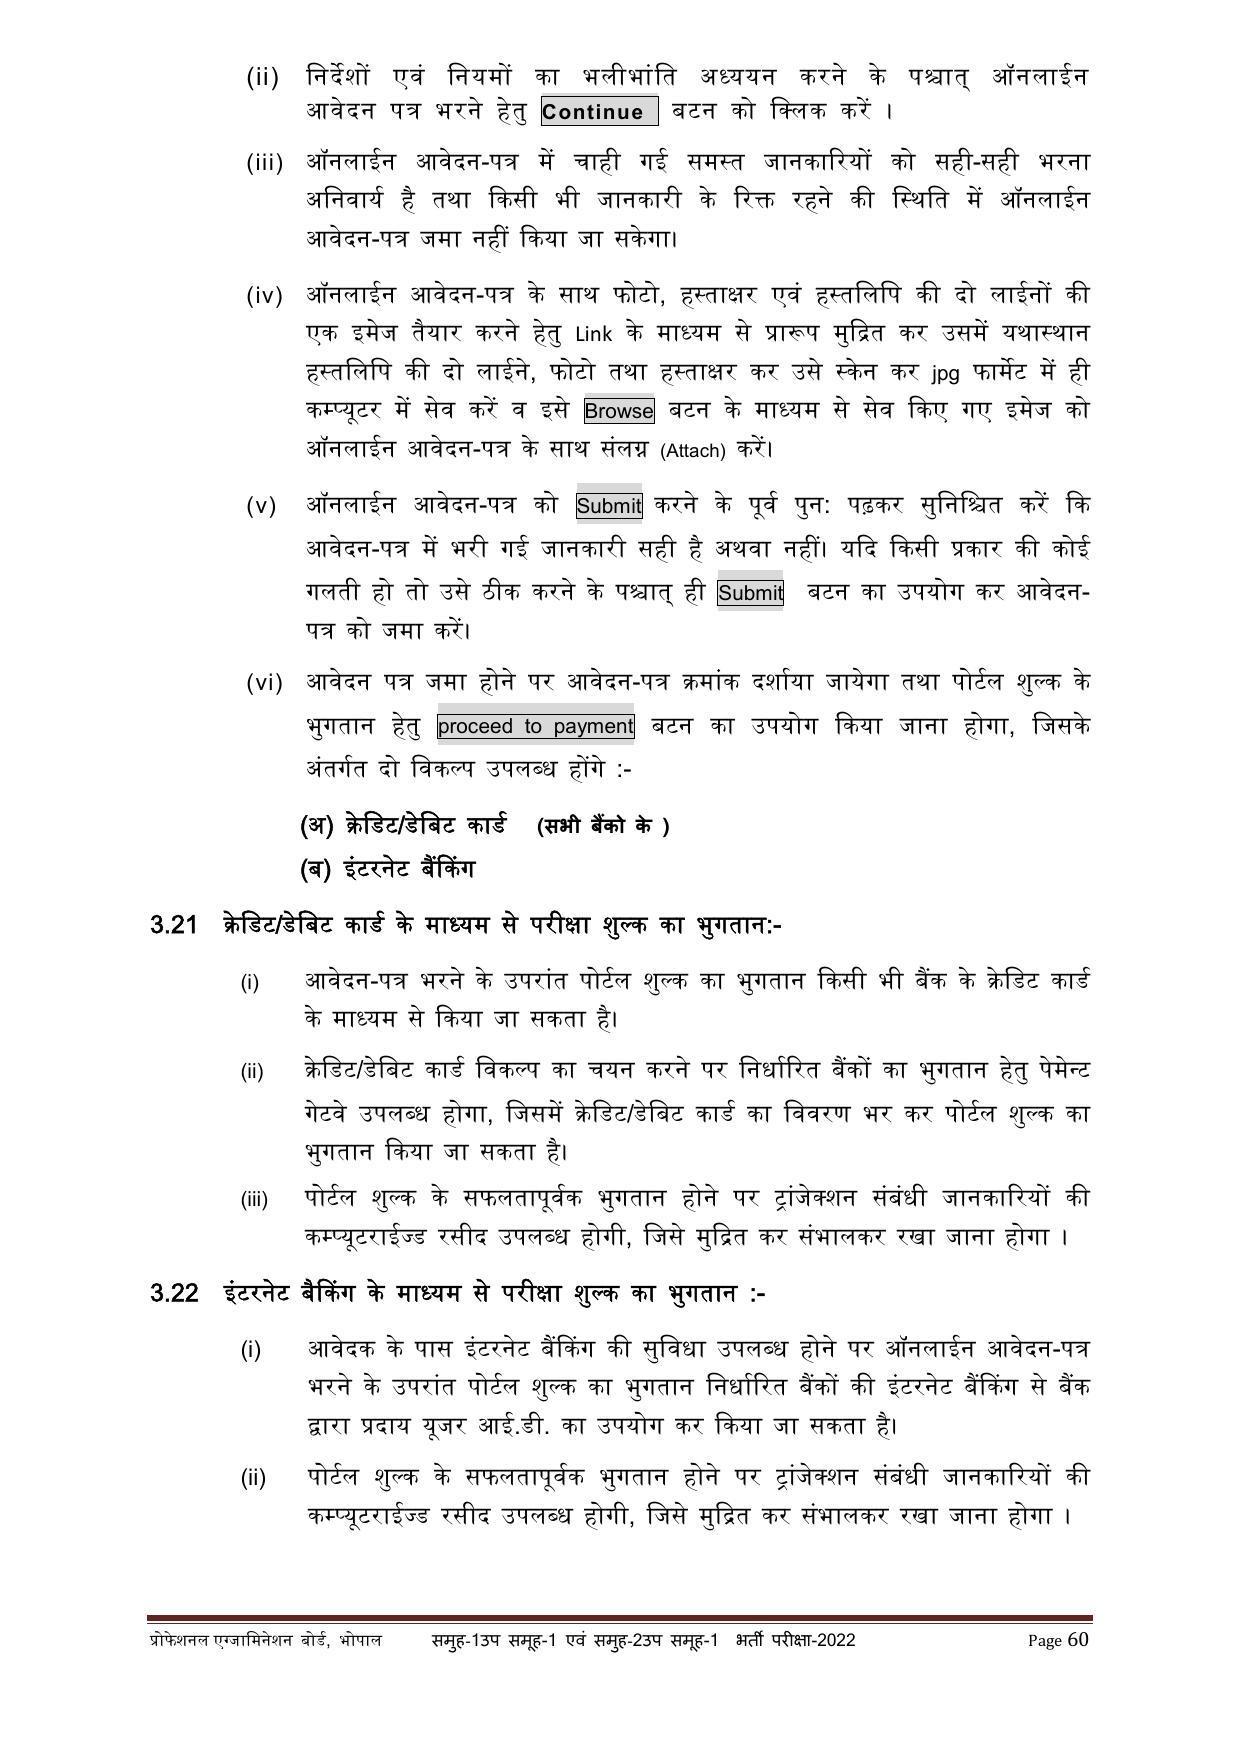 MPPEB Group-I Sub Group-I & Group-II Sub Group-I Recruitment 2022 - Page 60